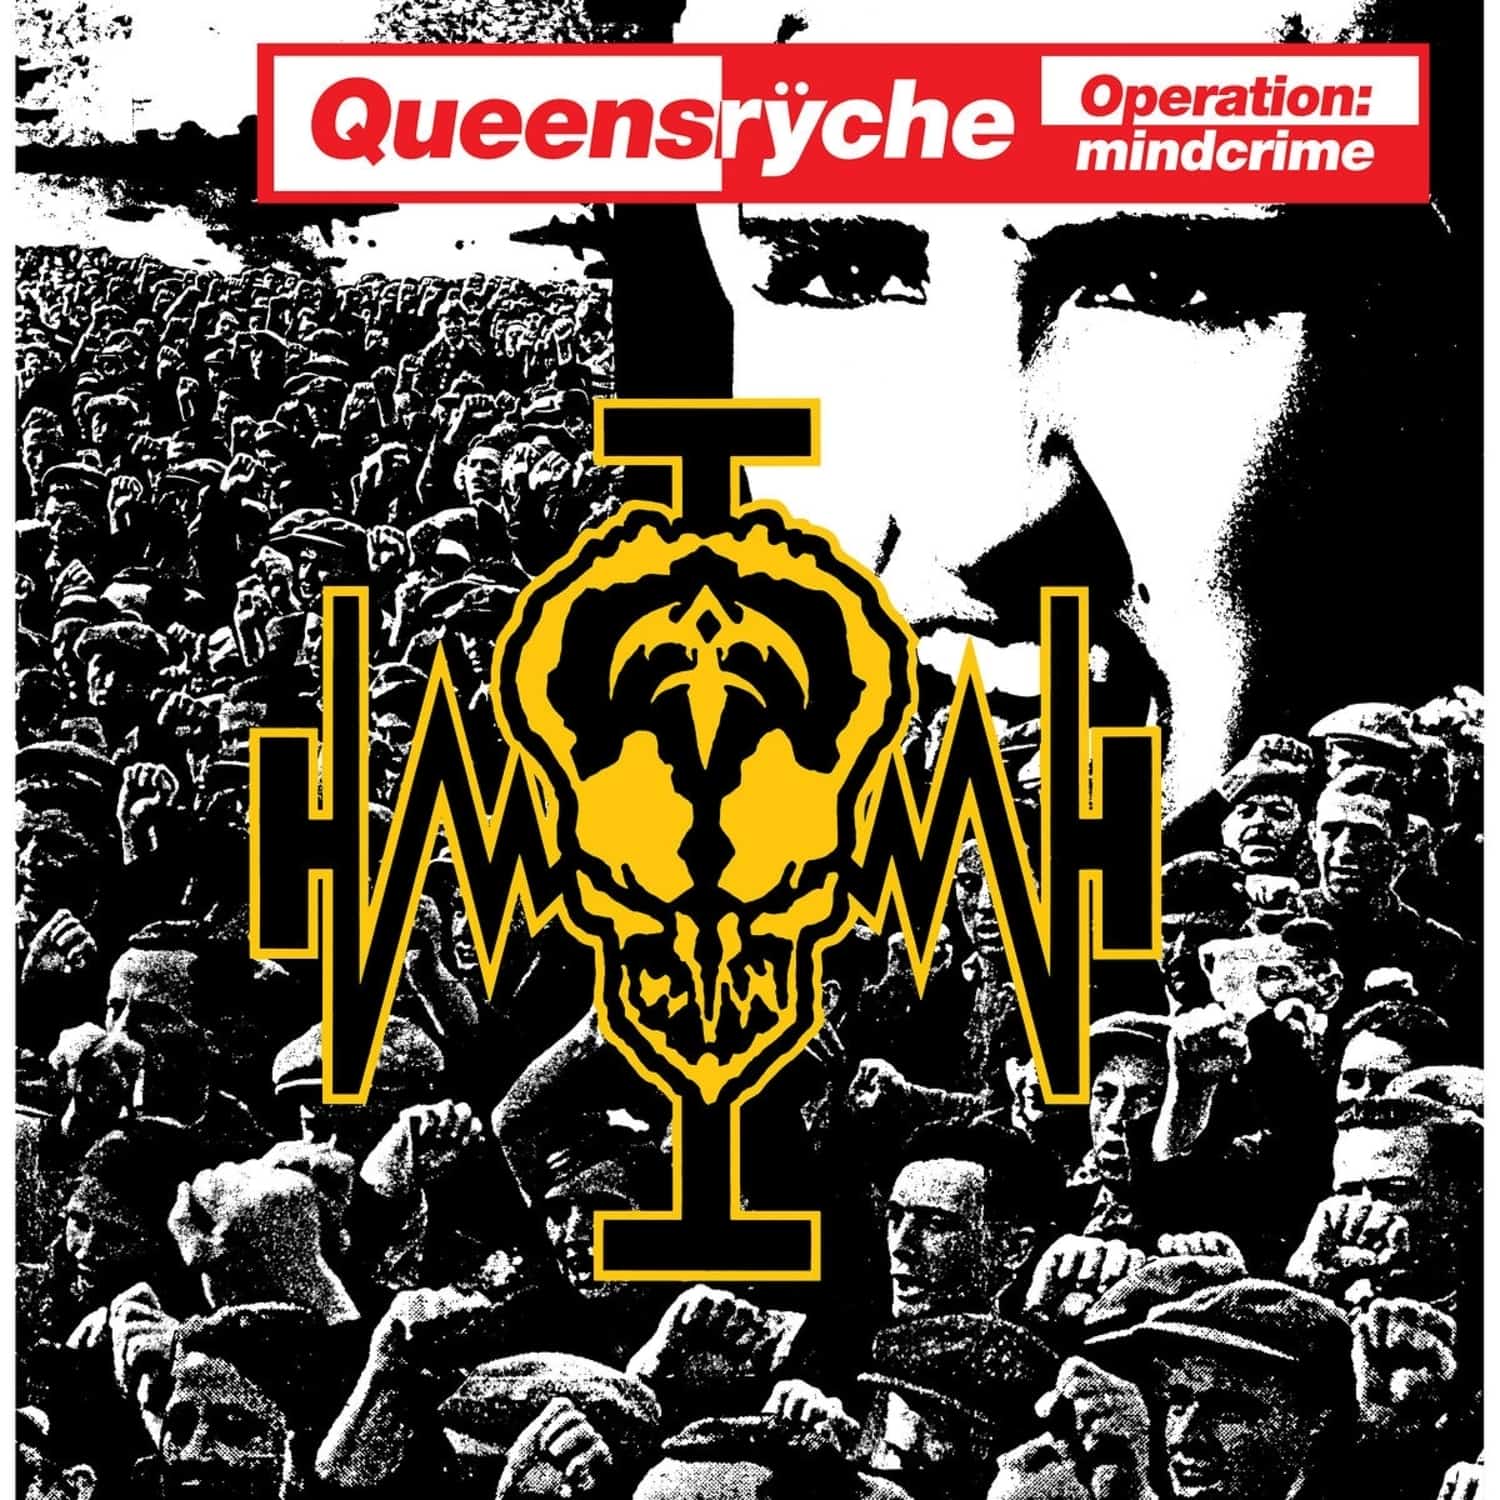 Queensryche - OPERATION MINDCRIME 